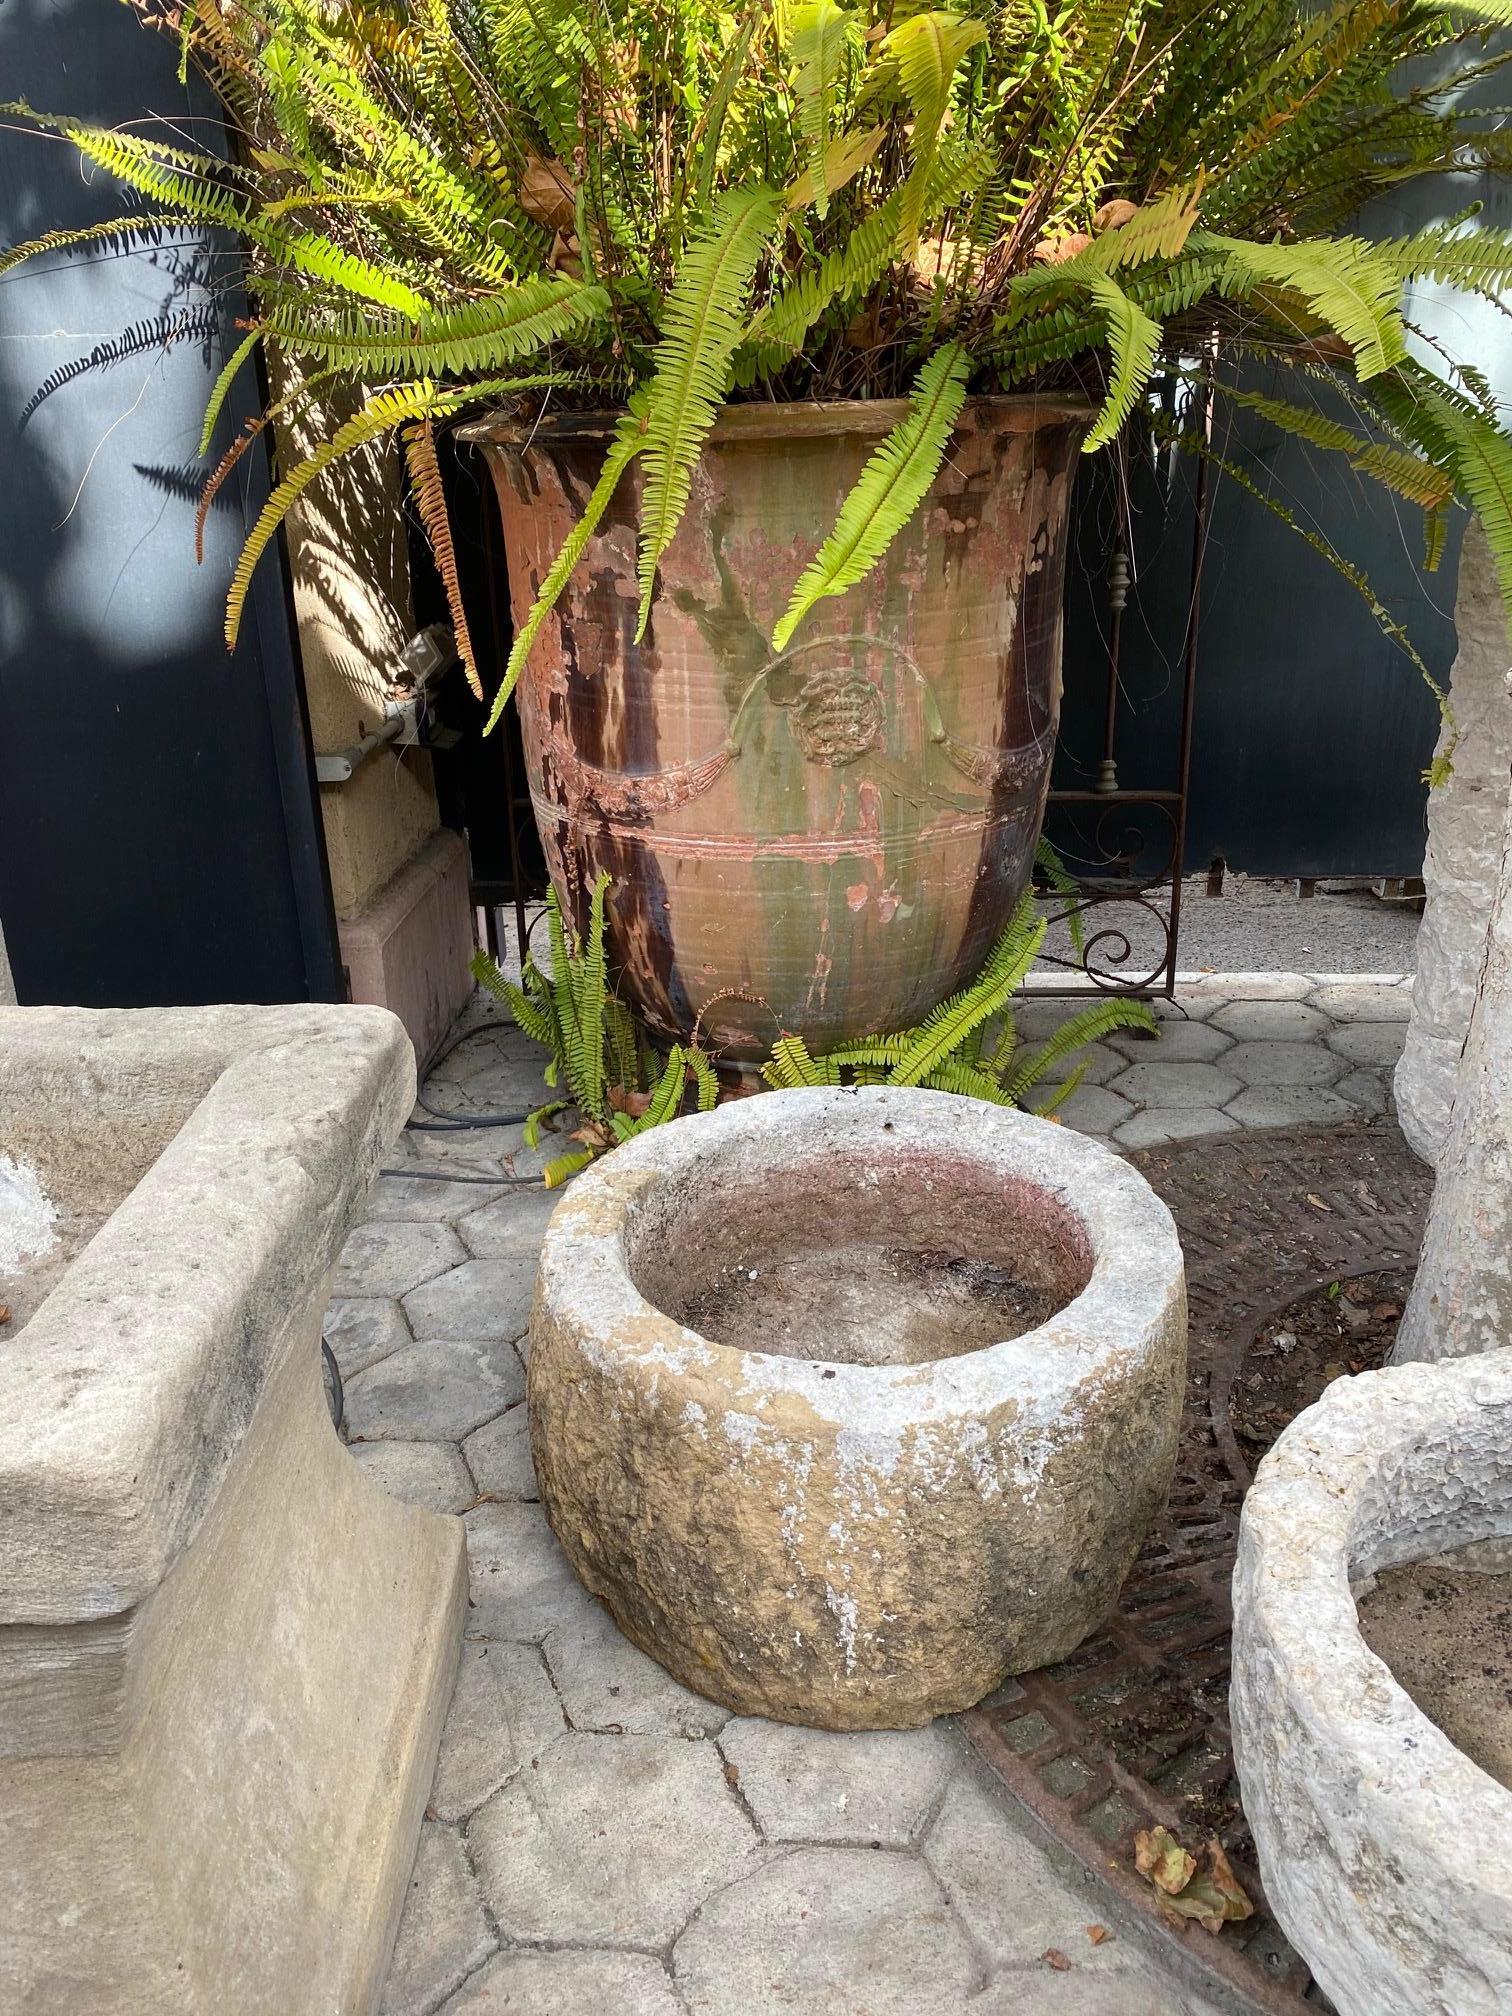 A beautiful 18th / 19th century hand carved stone container basin having a nicely textured surface and patina. It could be standing alone as a decorative object or used as a planter indoor outdoor. This antique stone vessel mortar planter has a lot